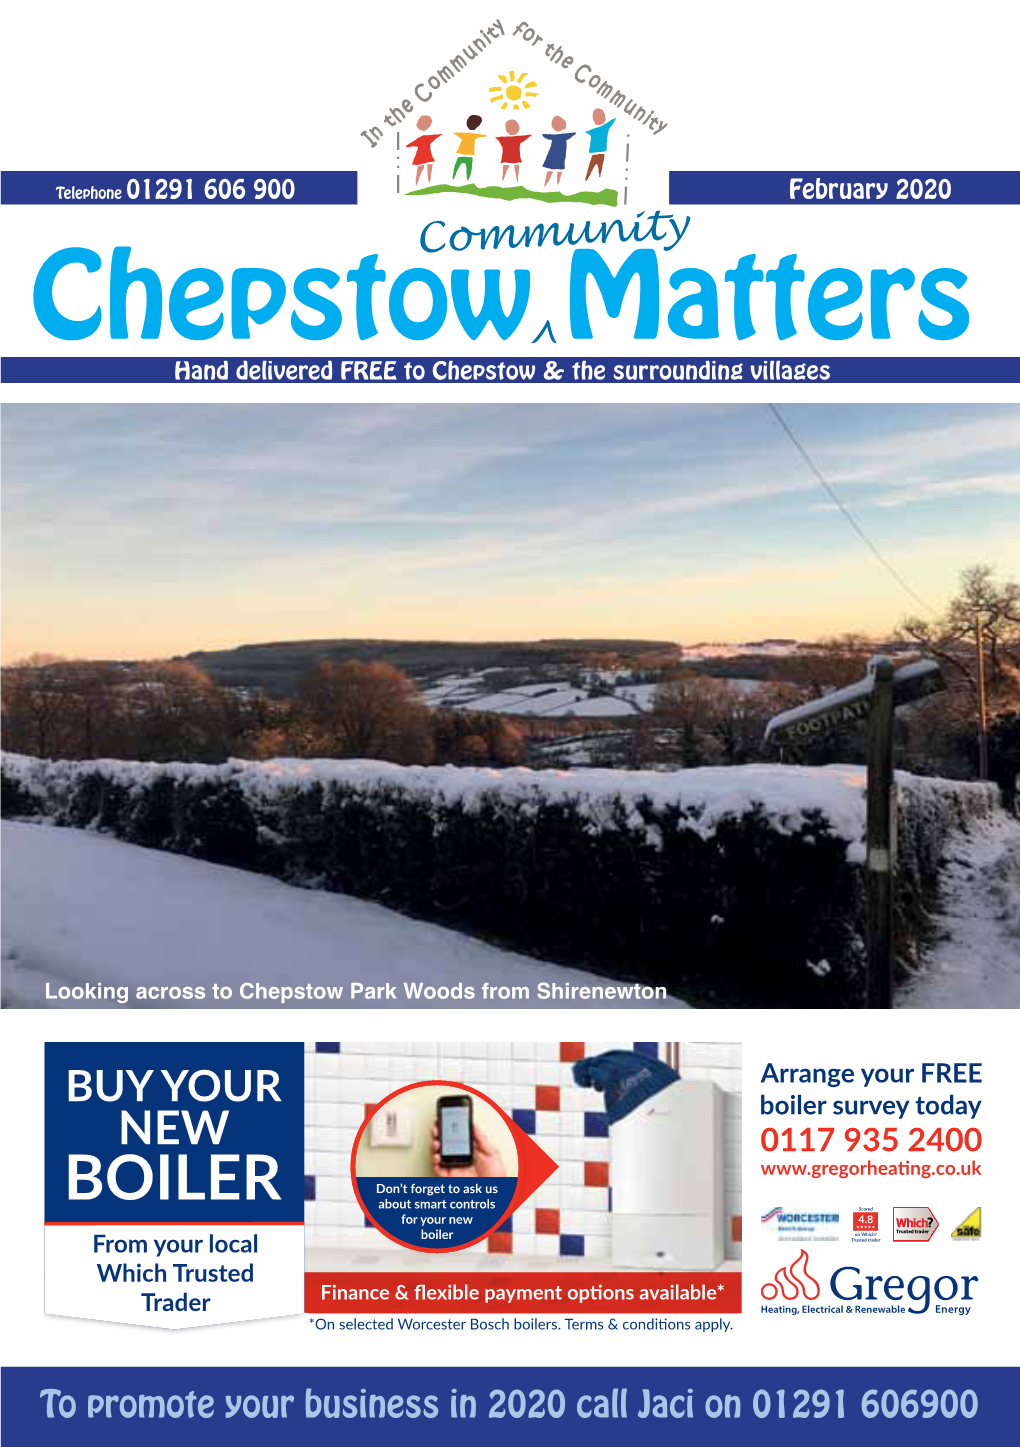 Chepstow^ Matters Hand Delivered FREE to Chepstow & the Surrounding Villages